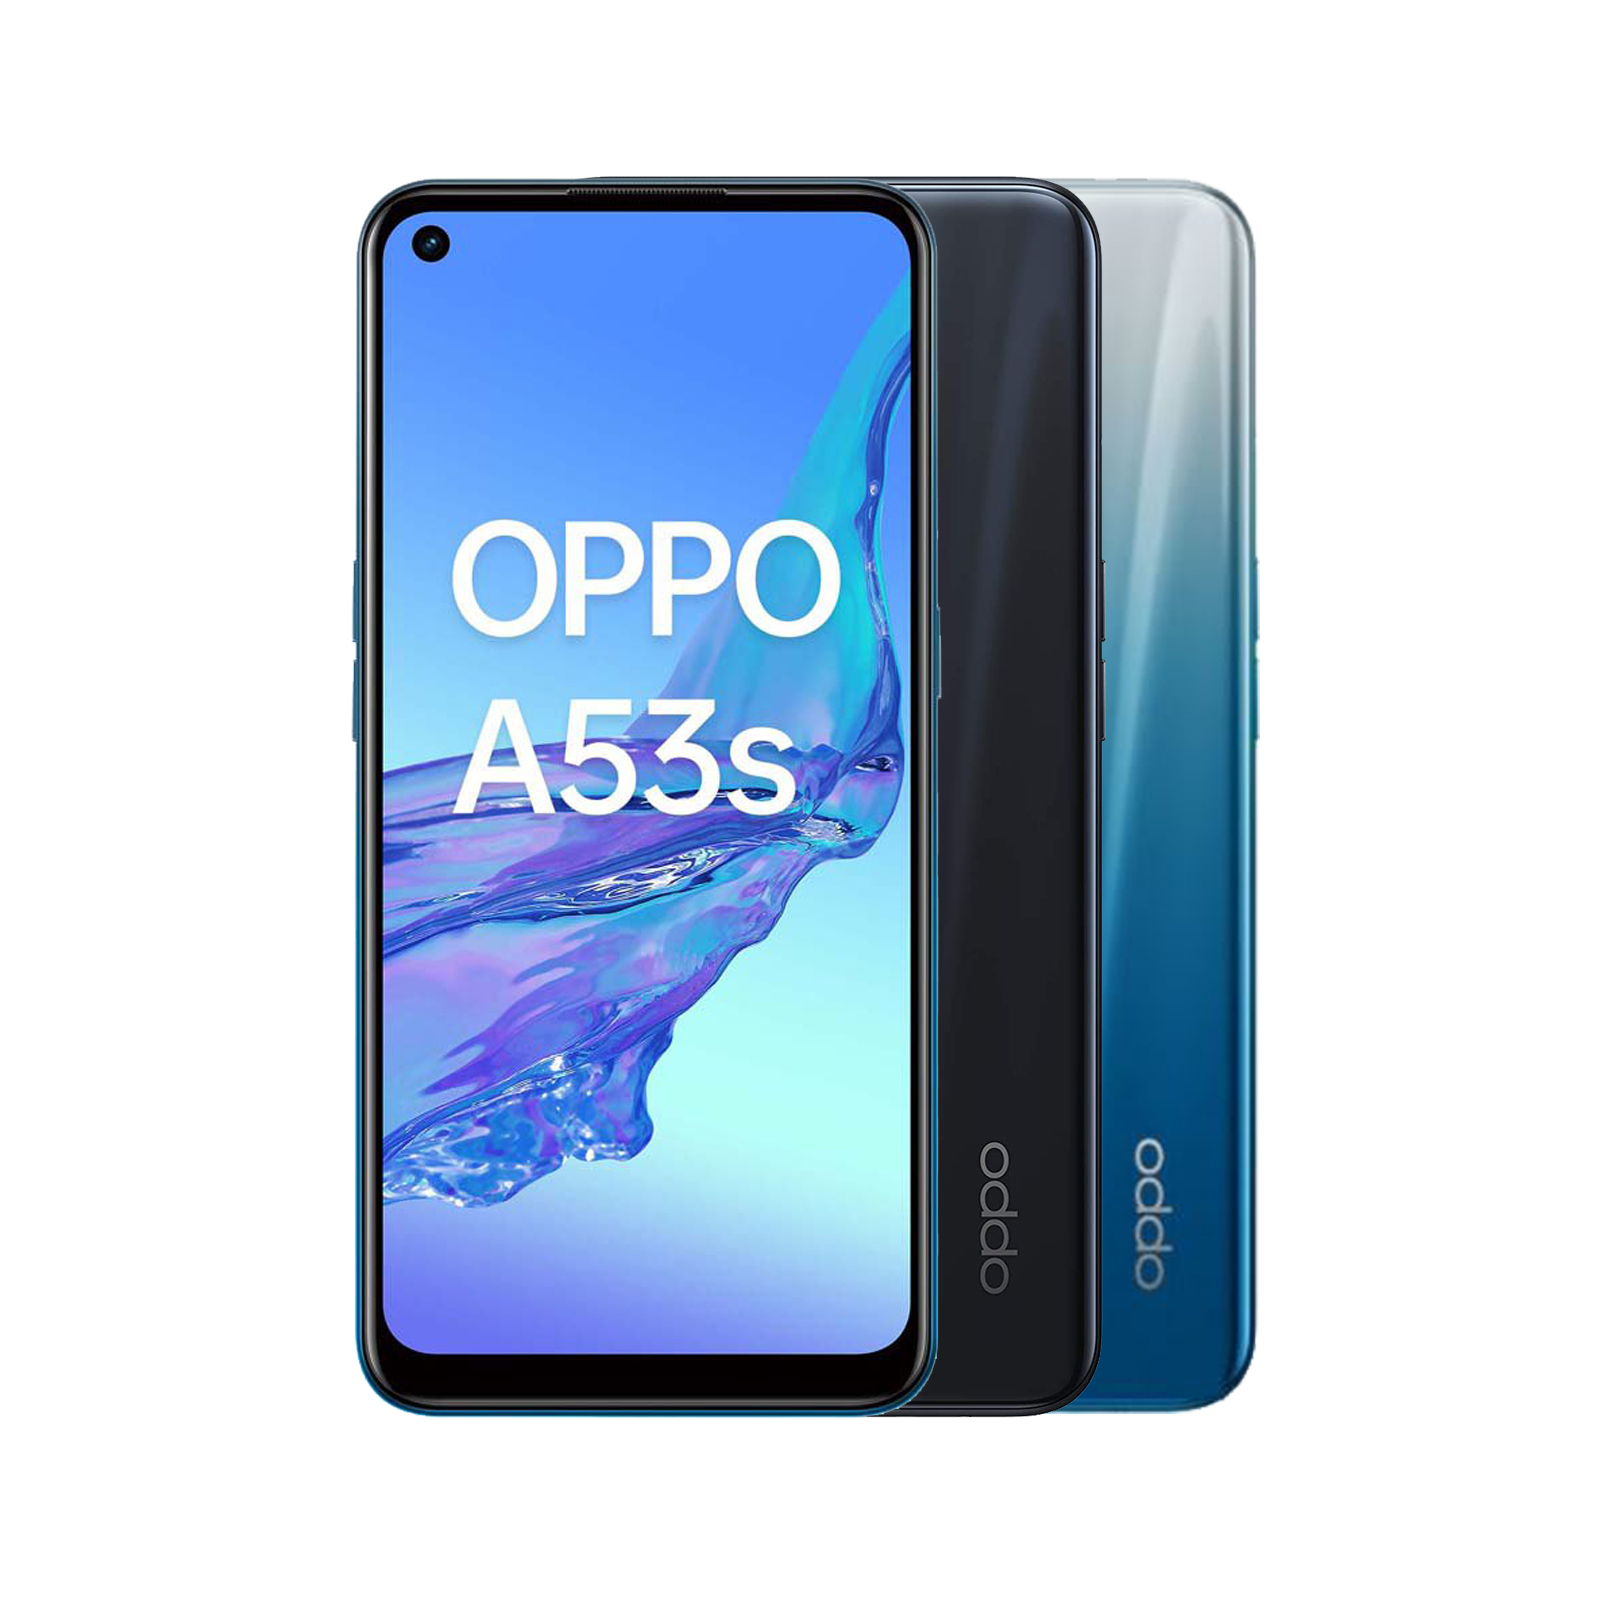 Oppo A53s - As New Condition